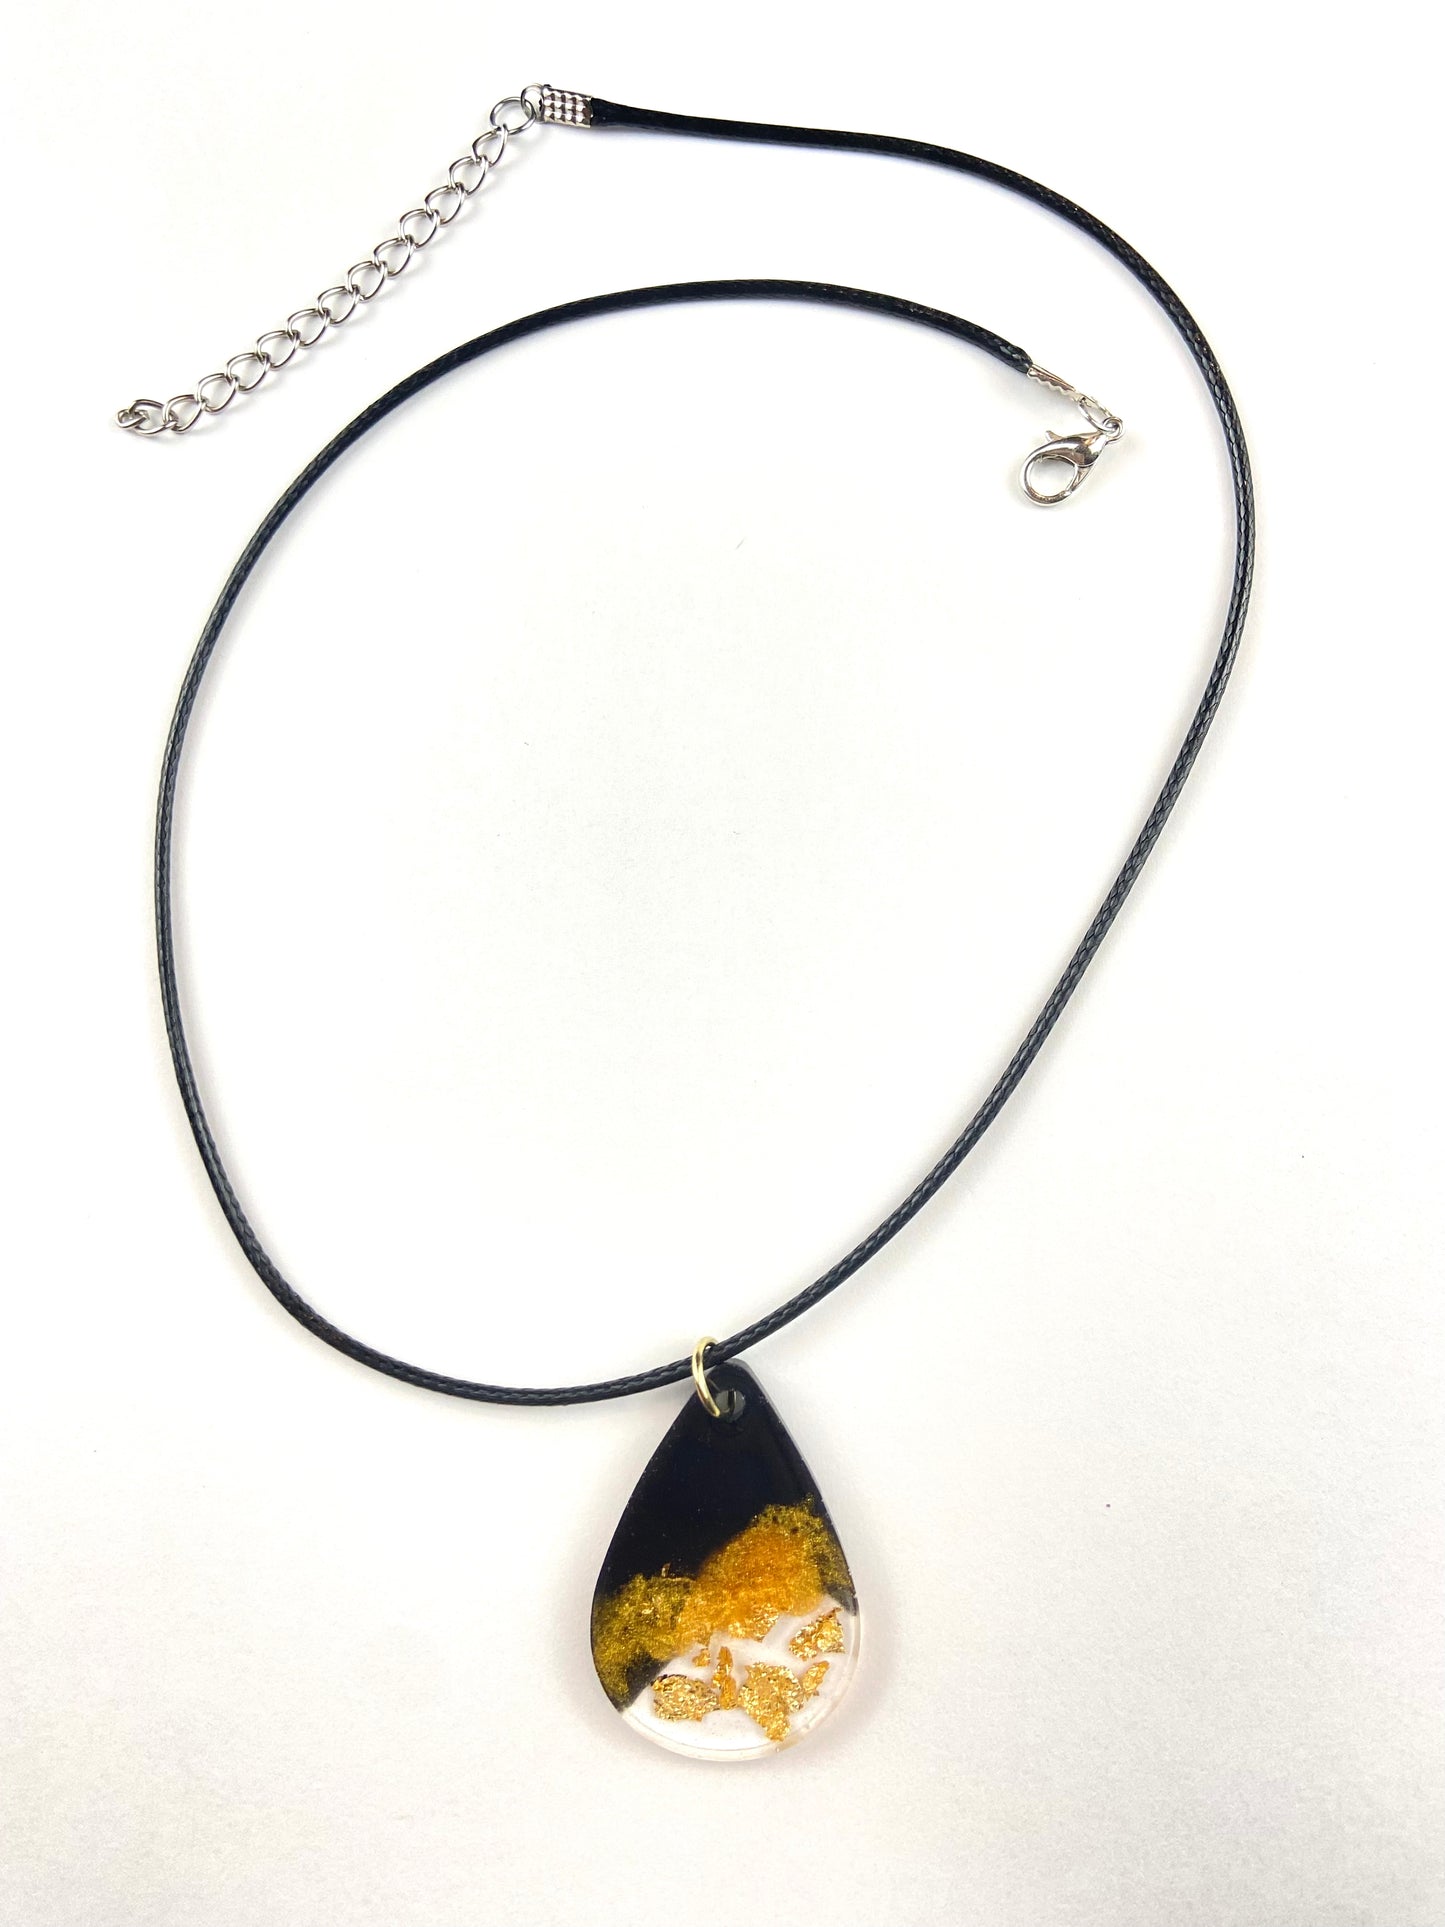 Black and Gold Handmade Resin Necklace